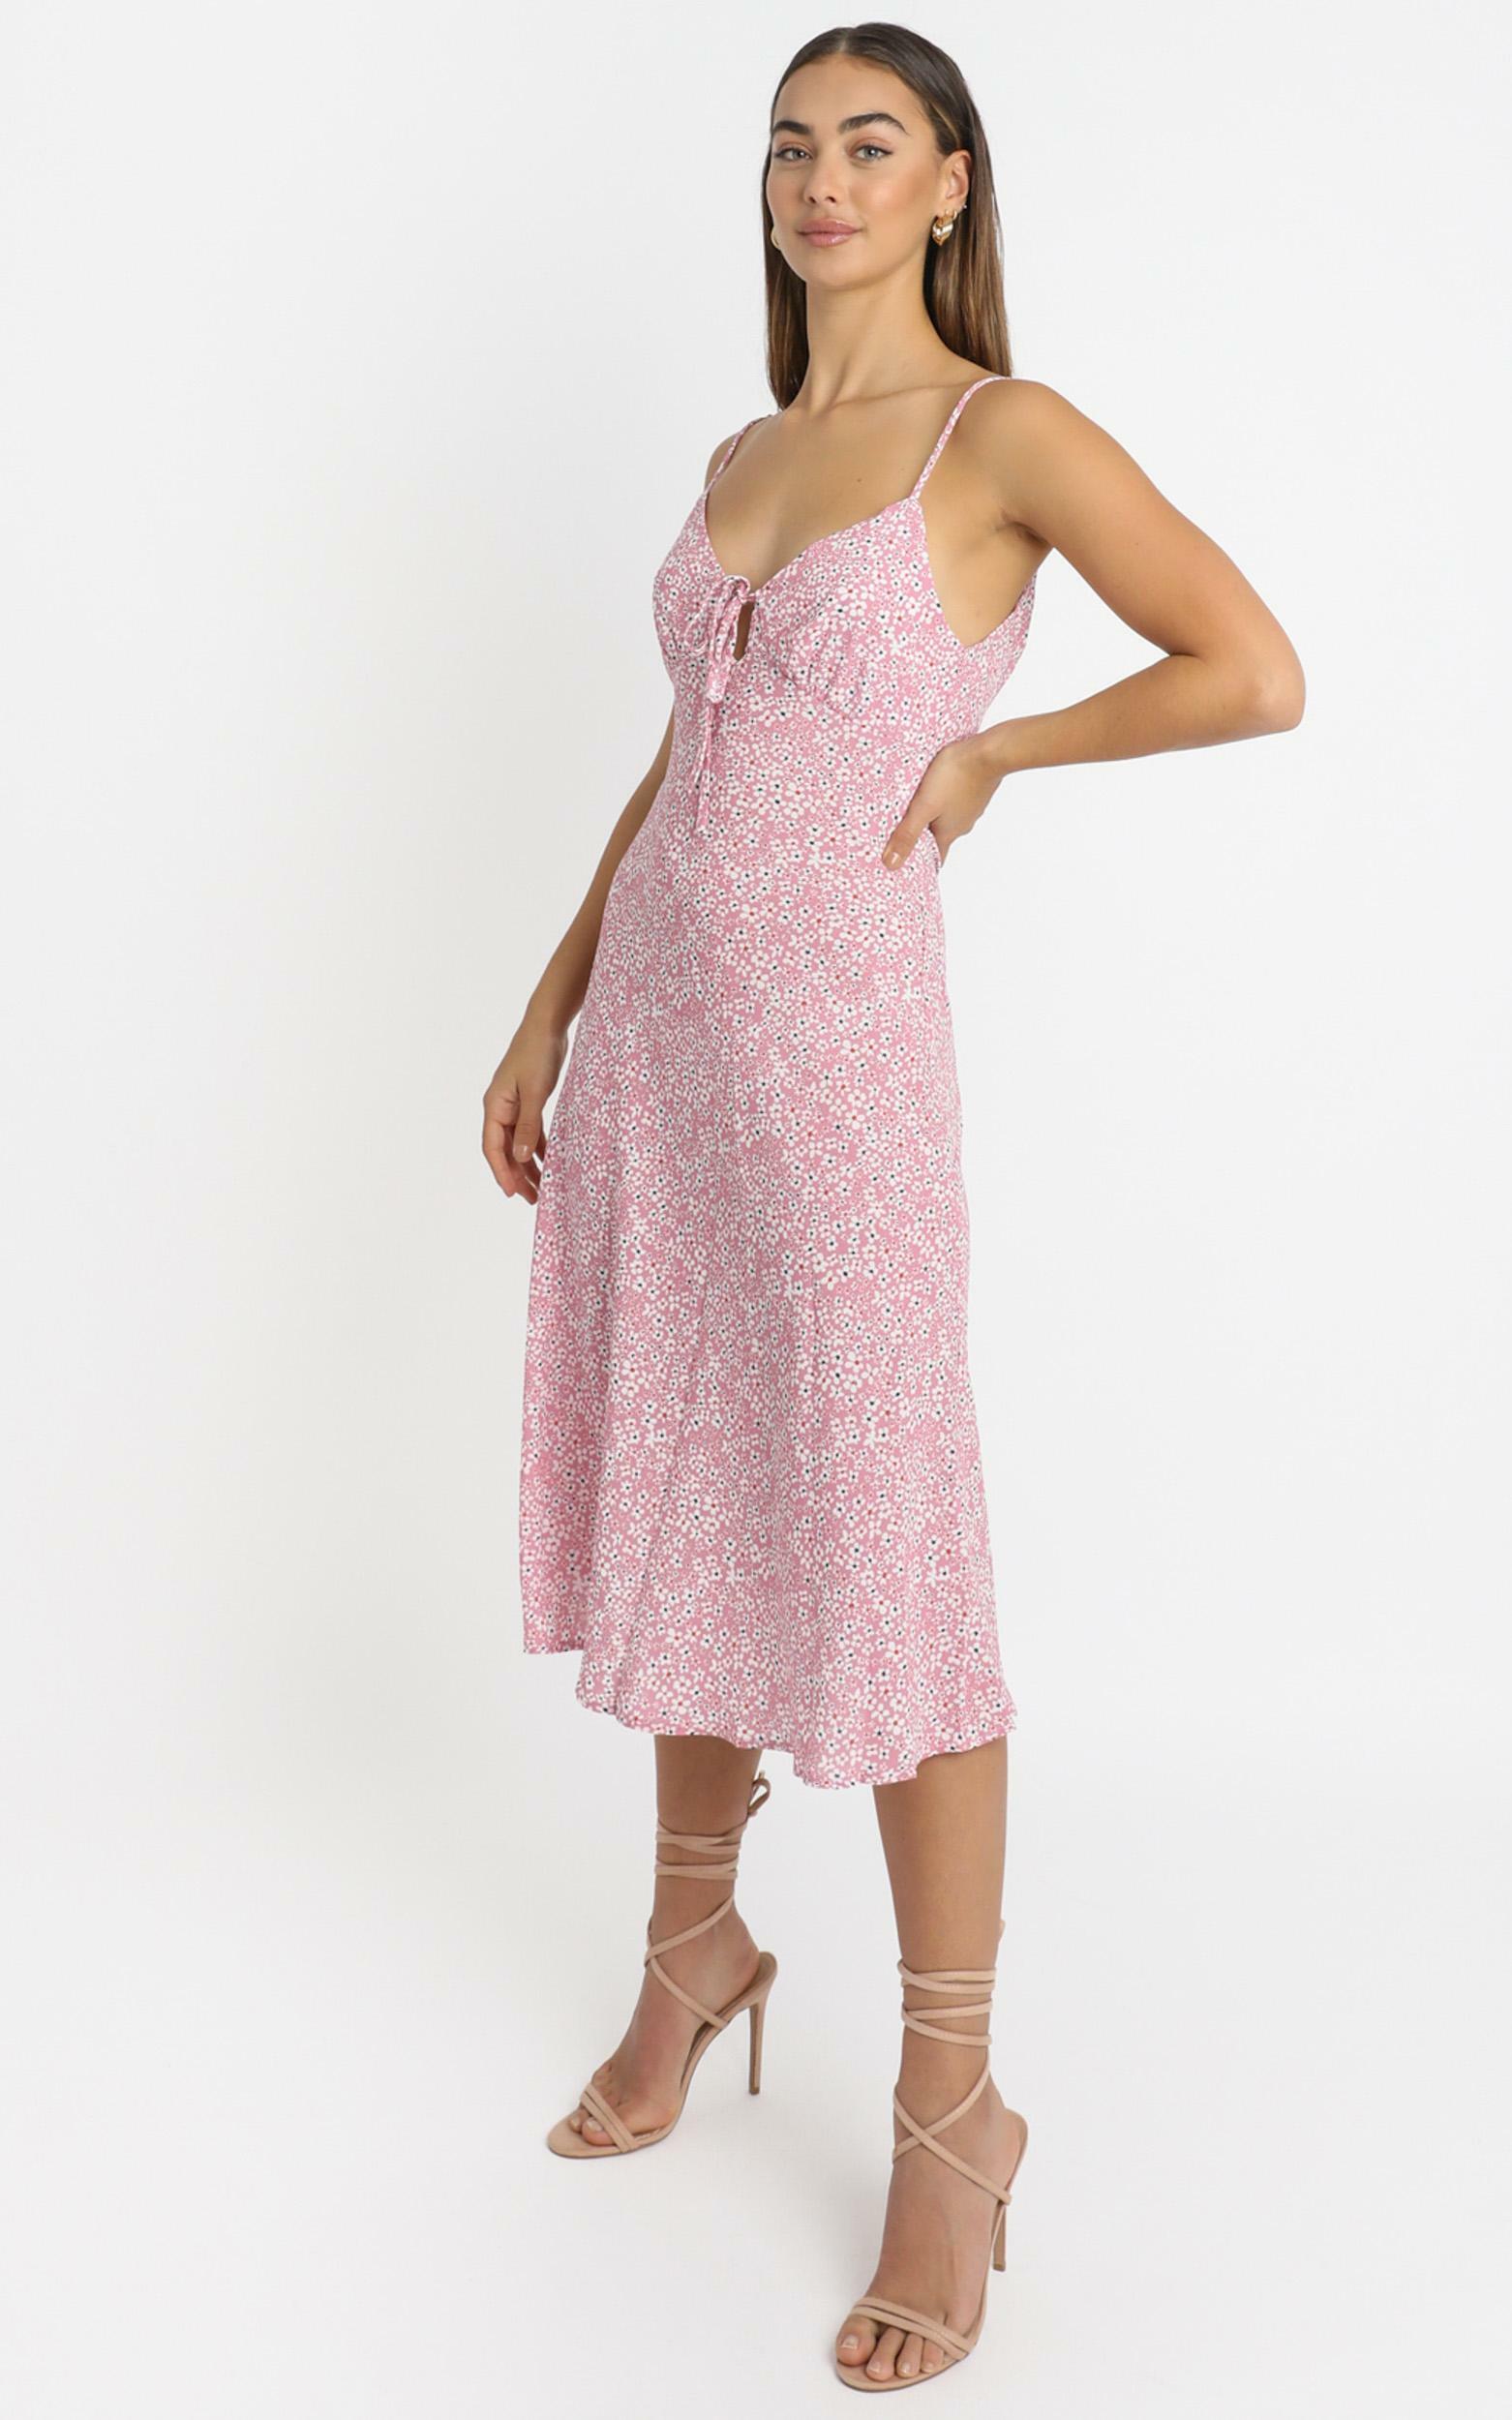 Toss The Dice dress in pink floral - 14 (XL), Pink, hi-res image number null